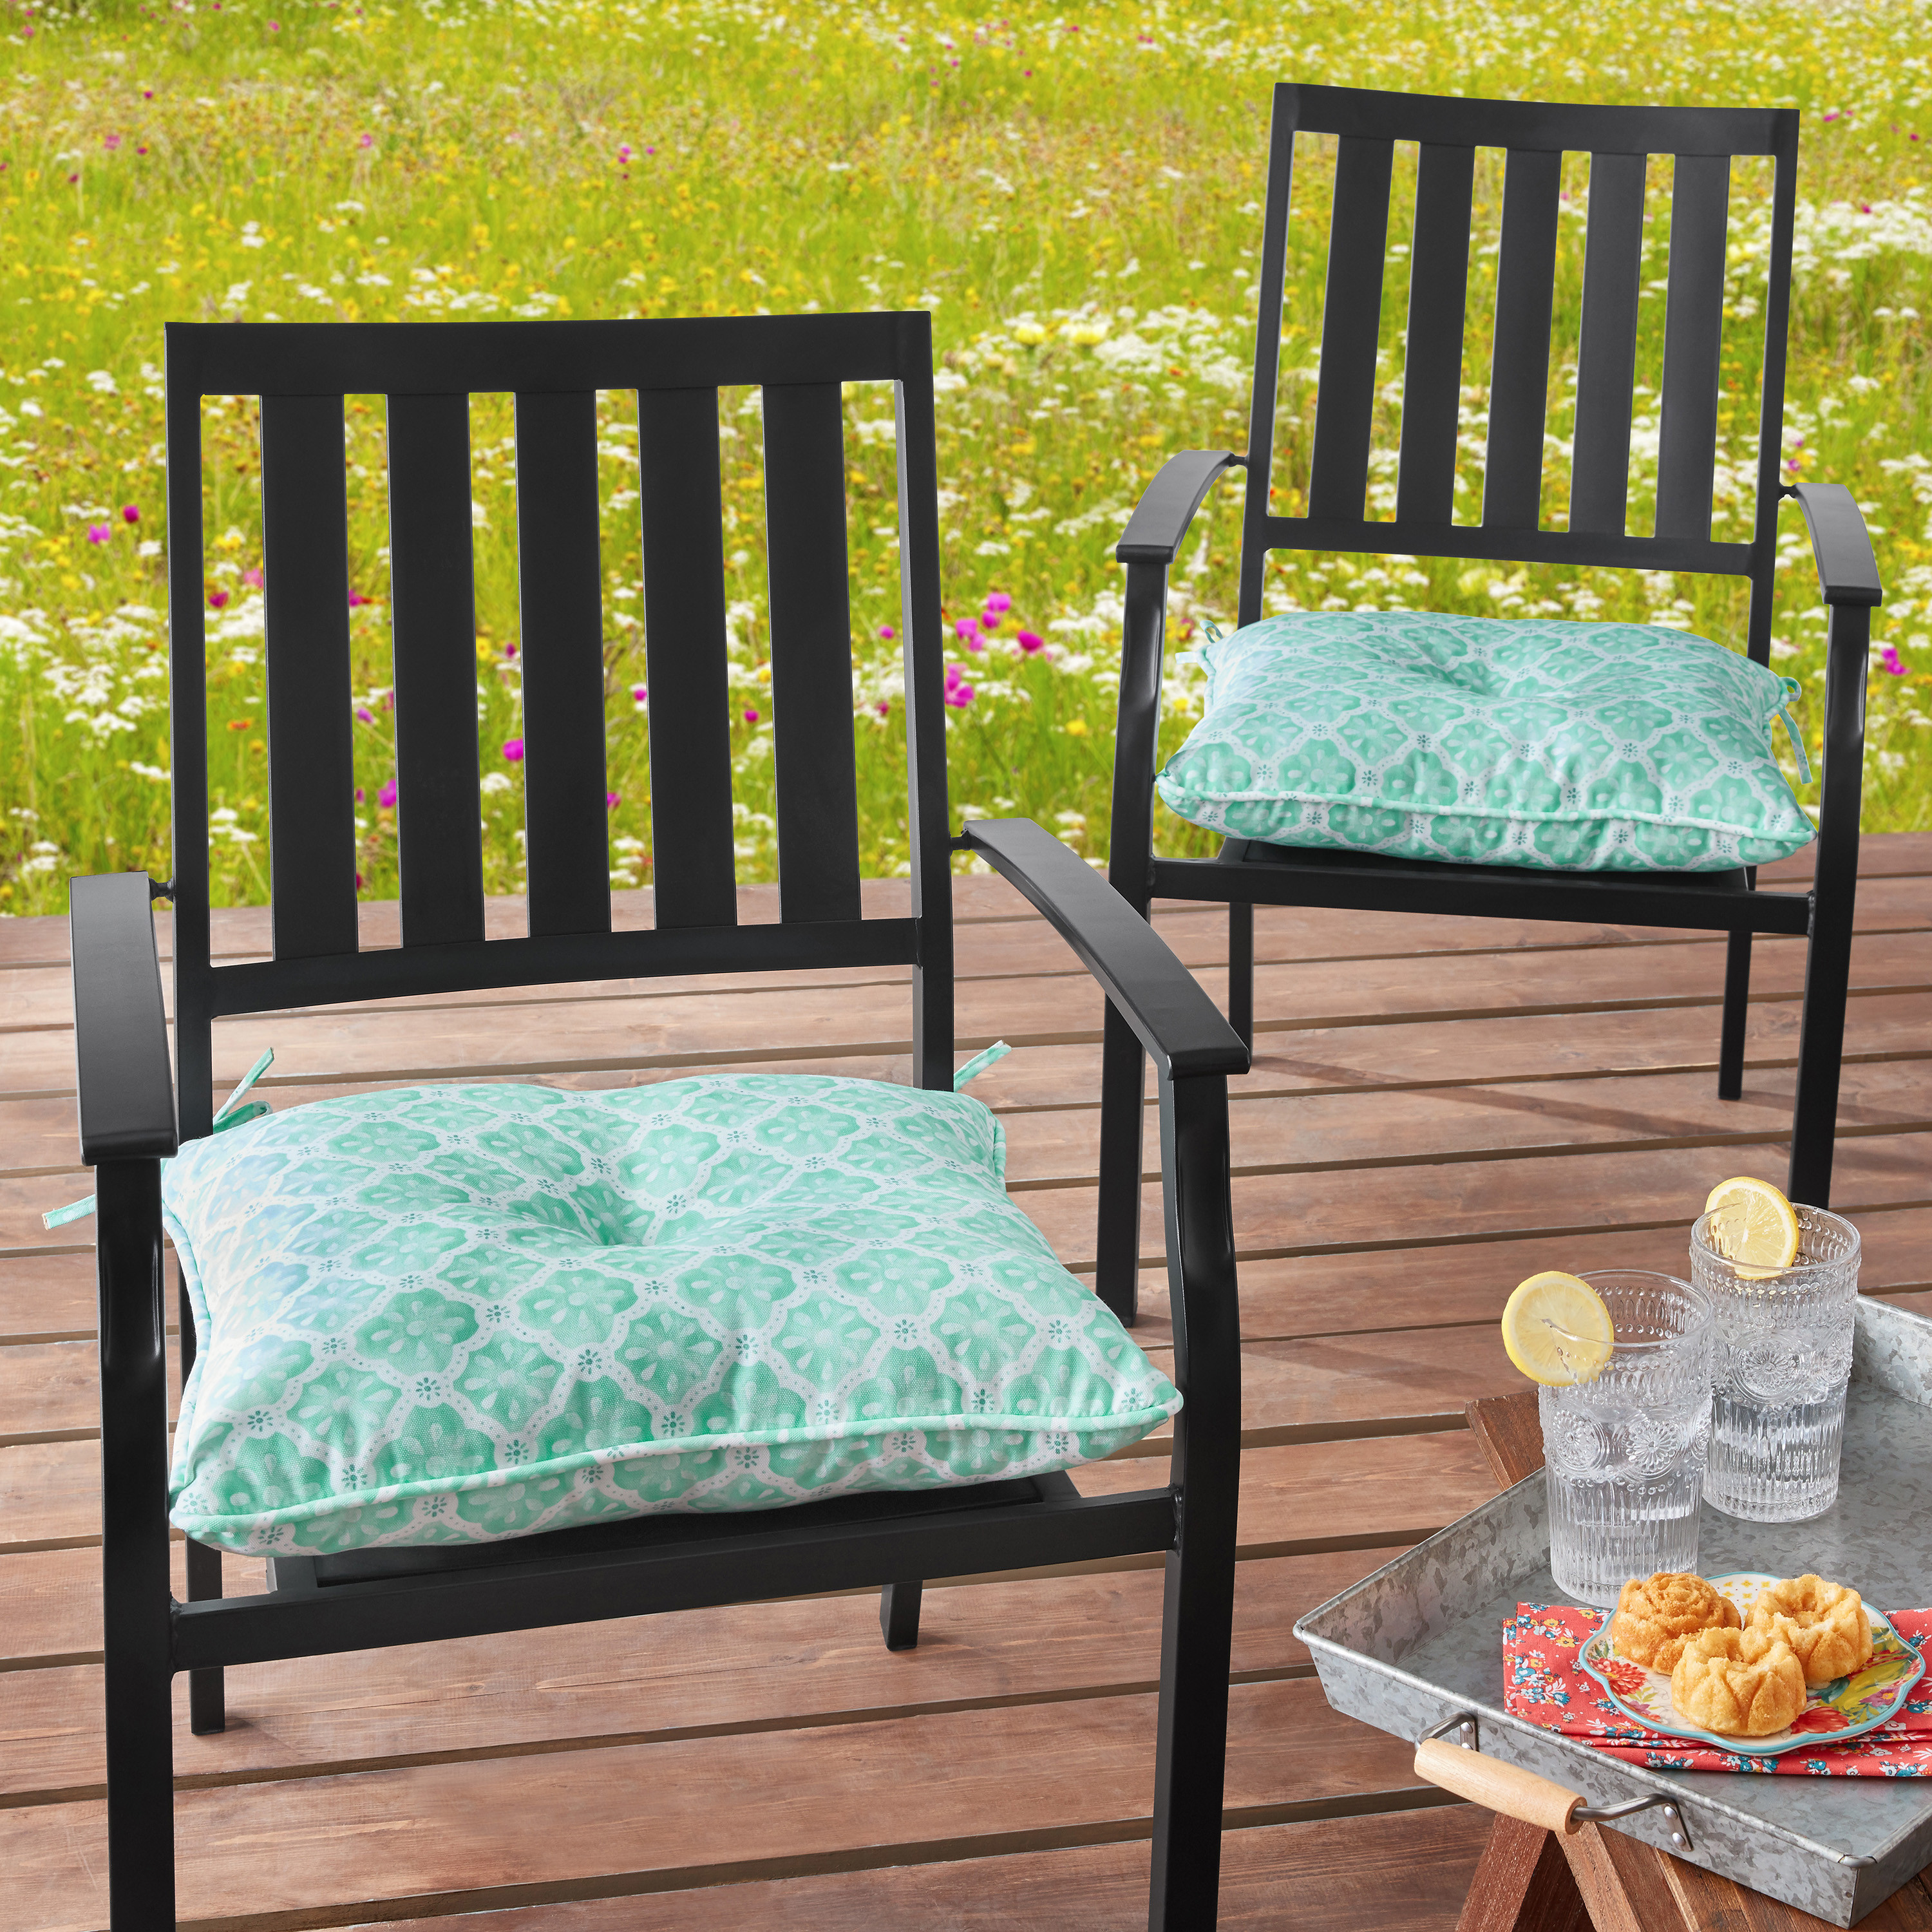 The Pioneer Woman 18" x 19" Green Washy Trellis Outdoor Seat Pad, 2 Pack - image 3 of 10